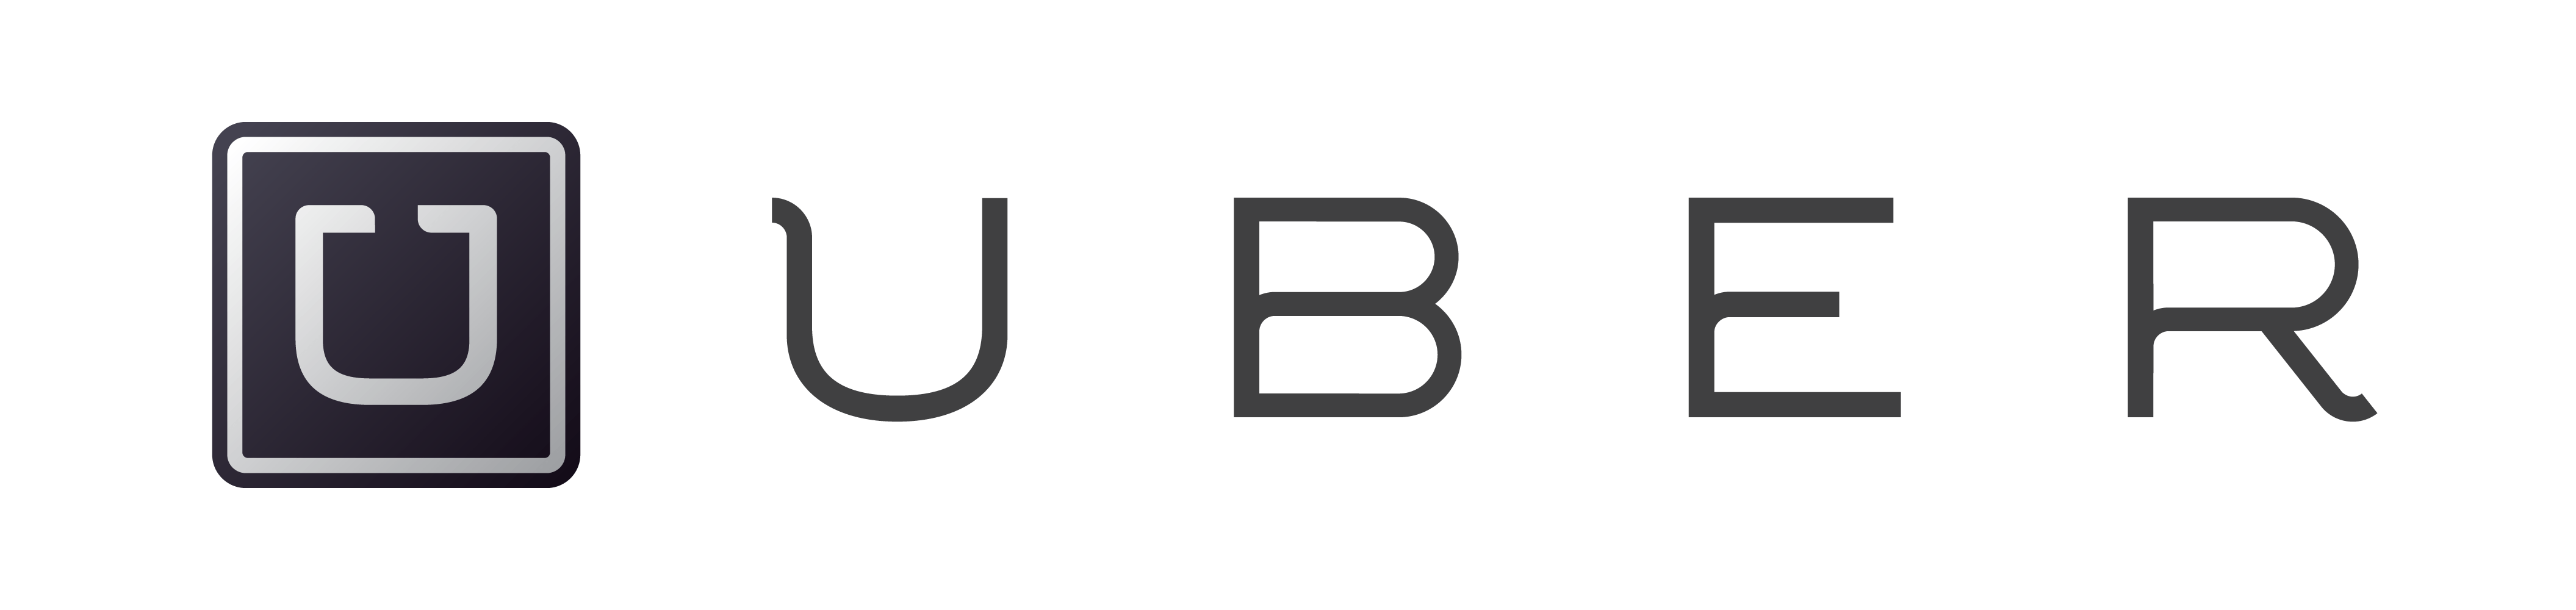 Uber Taxi Logo - Uber Madrid - Your ride, on demand at great discount! - Citylife Madrid